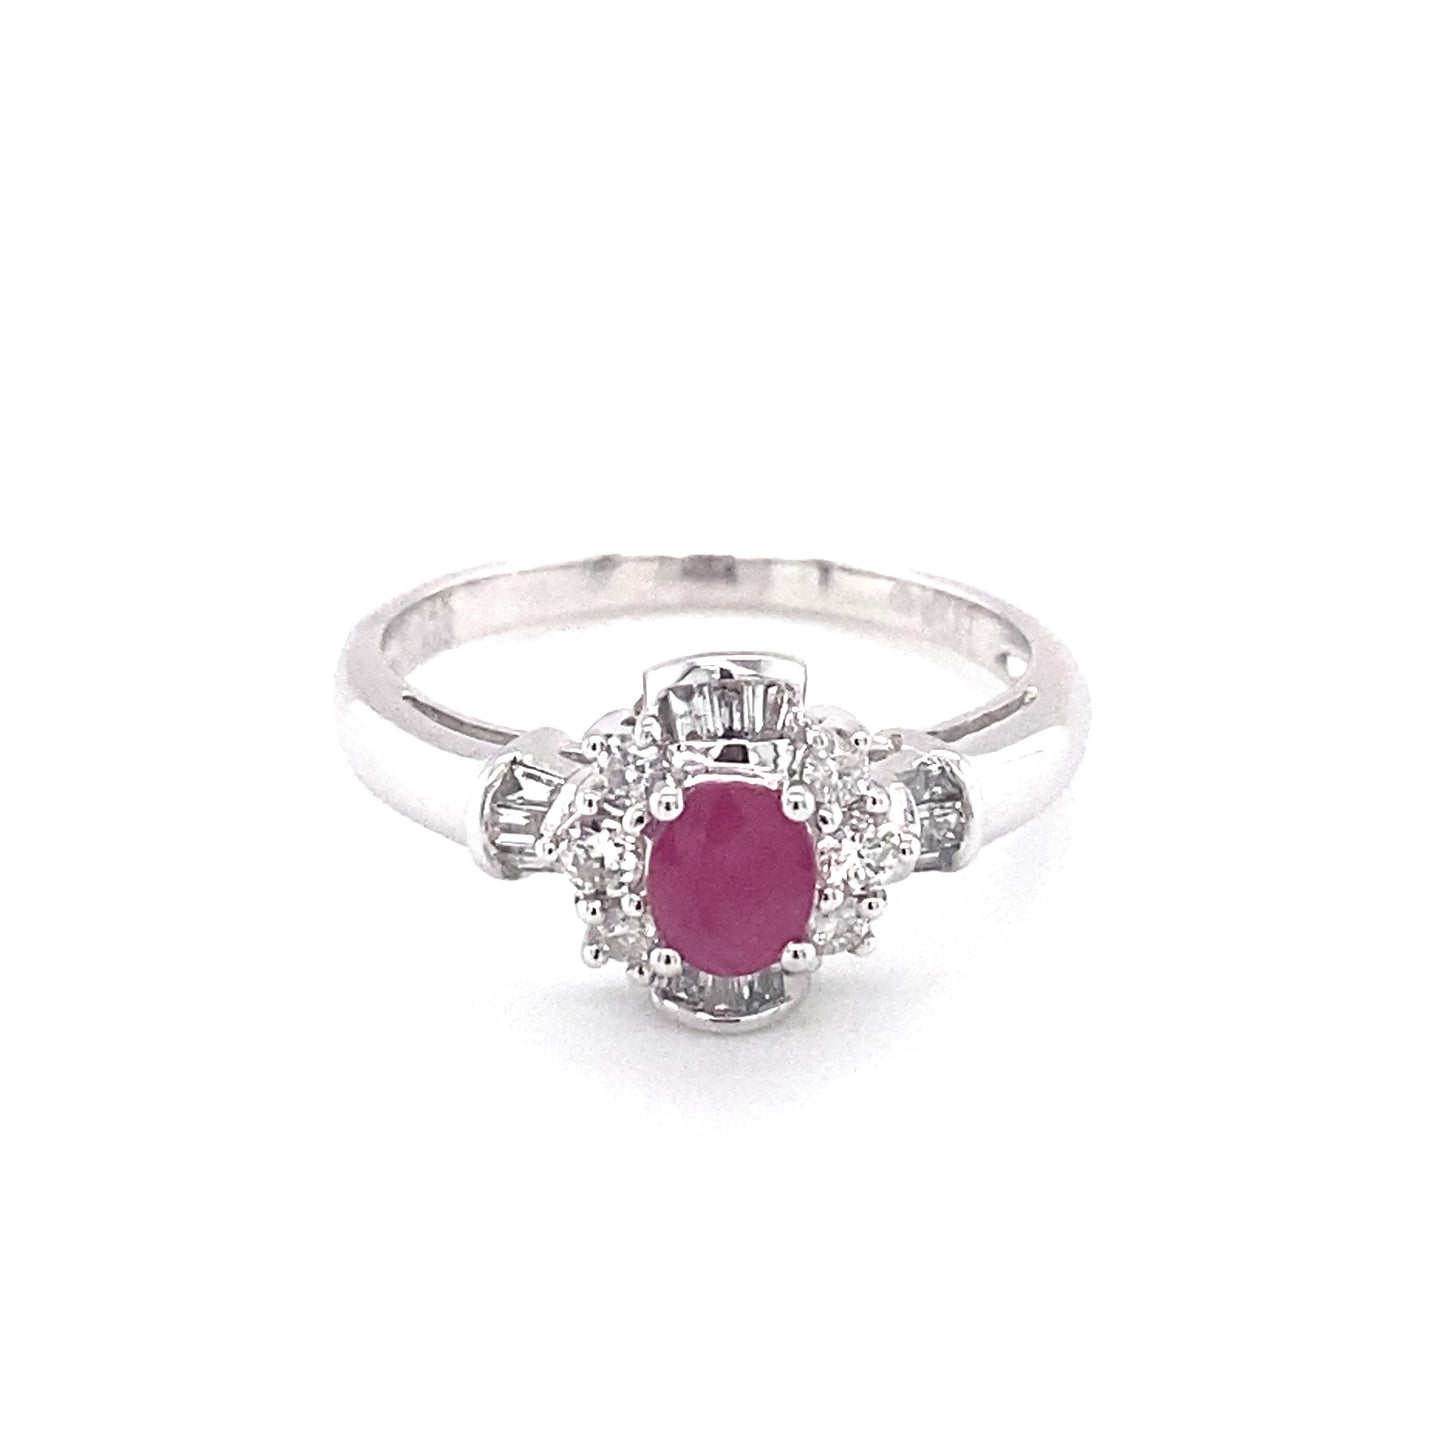 Circa 2000s 0.51ct Ruby and Diamond Ring in 14K White Gold